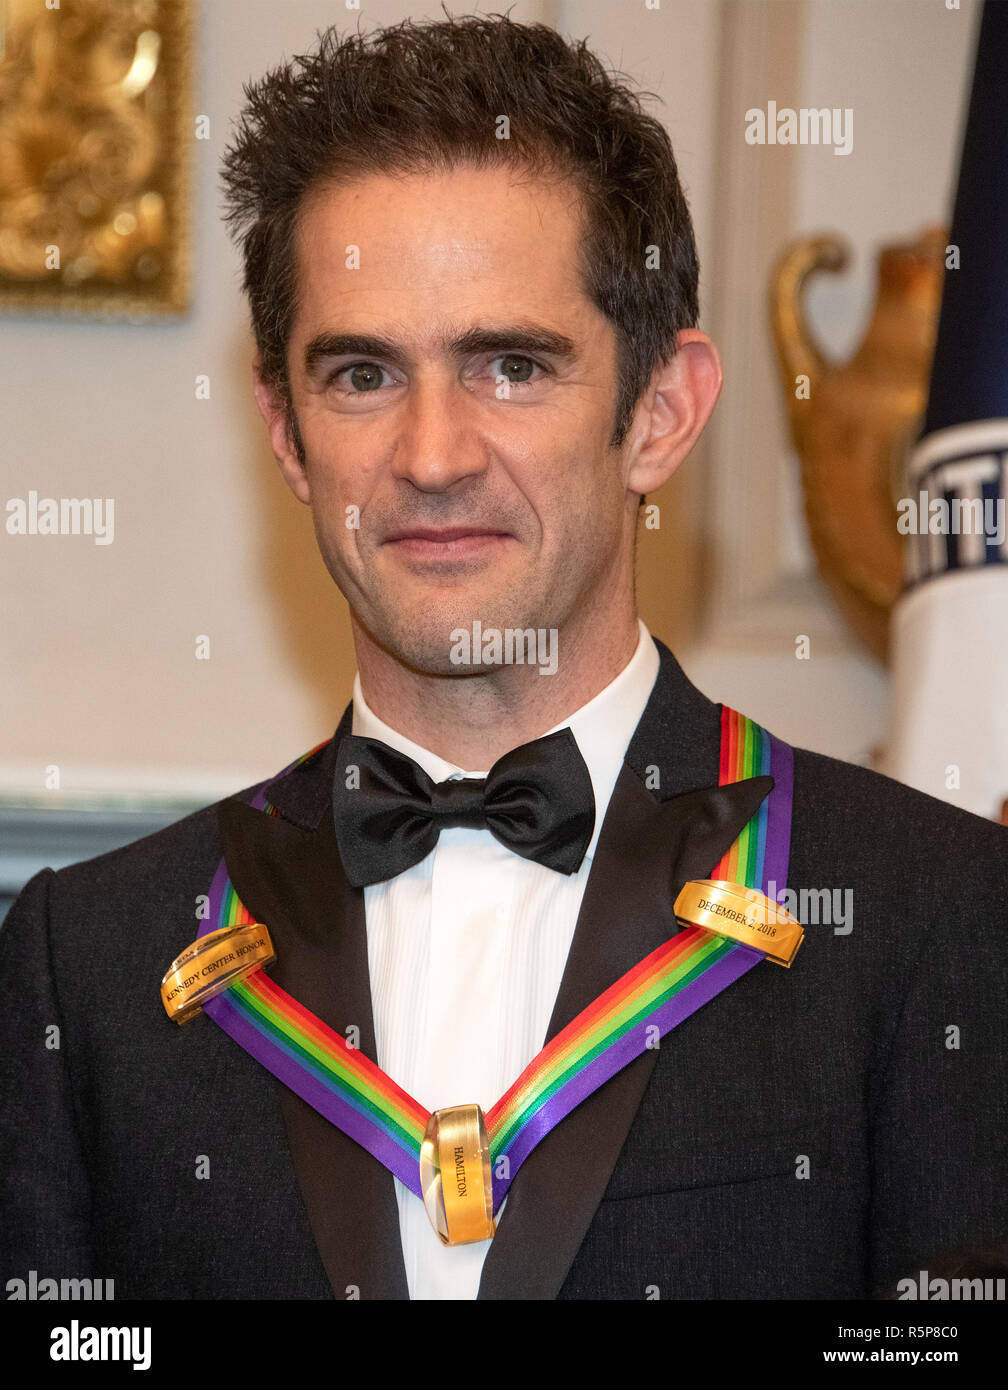 Andy Blankenbuehler, one of the special honorees for Groundbreaking Work on Hamilton, as he poses with the recipients of the 41st Annual Kennedy Center Honors pose for a group photo following a dinner hosted by United States Deputy Secretary of State John J. Sullivan in their honor at the US Department of State in Washington, DC on Saturday, December 1, 2018. The 2018 honorees are: singer and actress Cher; composer and pianist Philip Glass; Country music entertainer Reba McEntire; and jazz saxophonist and composer Wayne Shorter. This year, the co-creators of Hamilton,- writer and actor Lin- Stock Photo